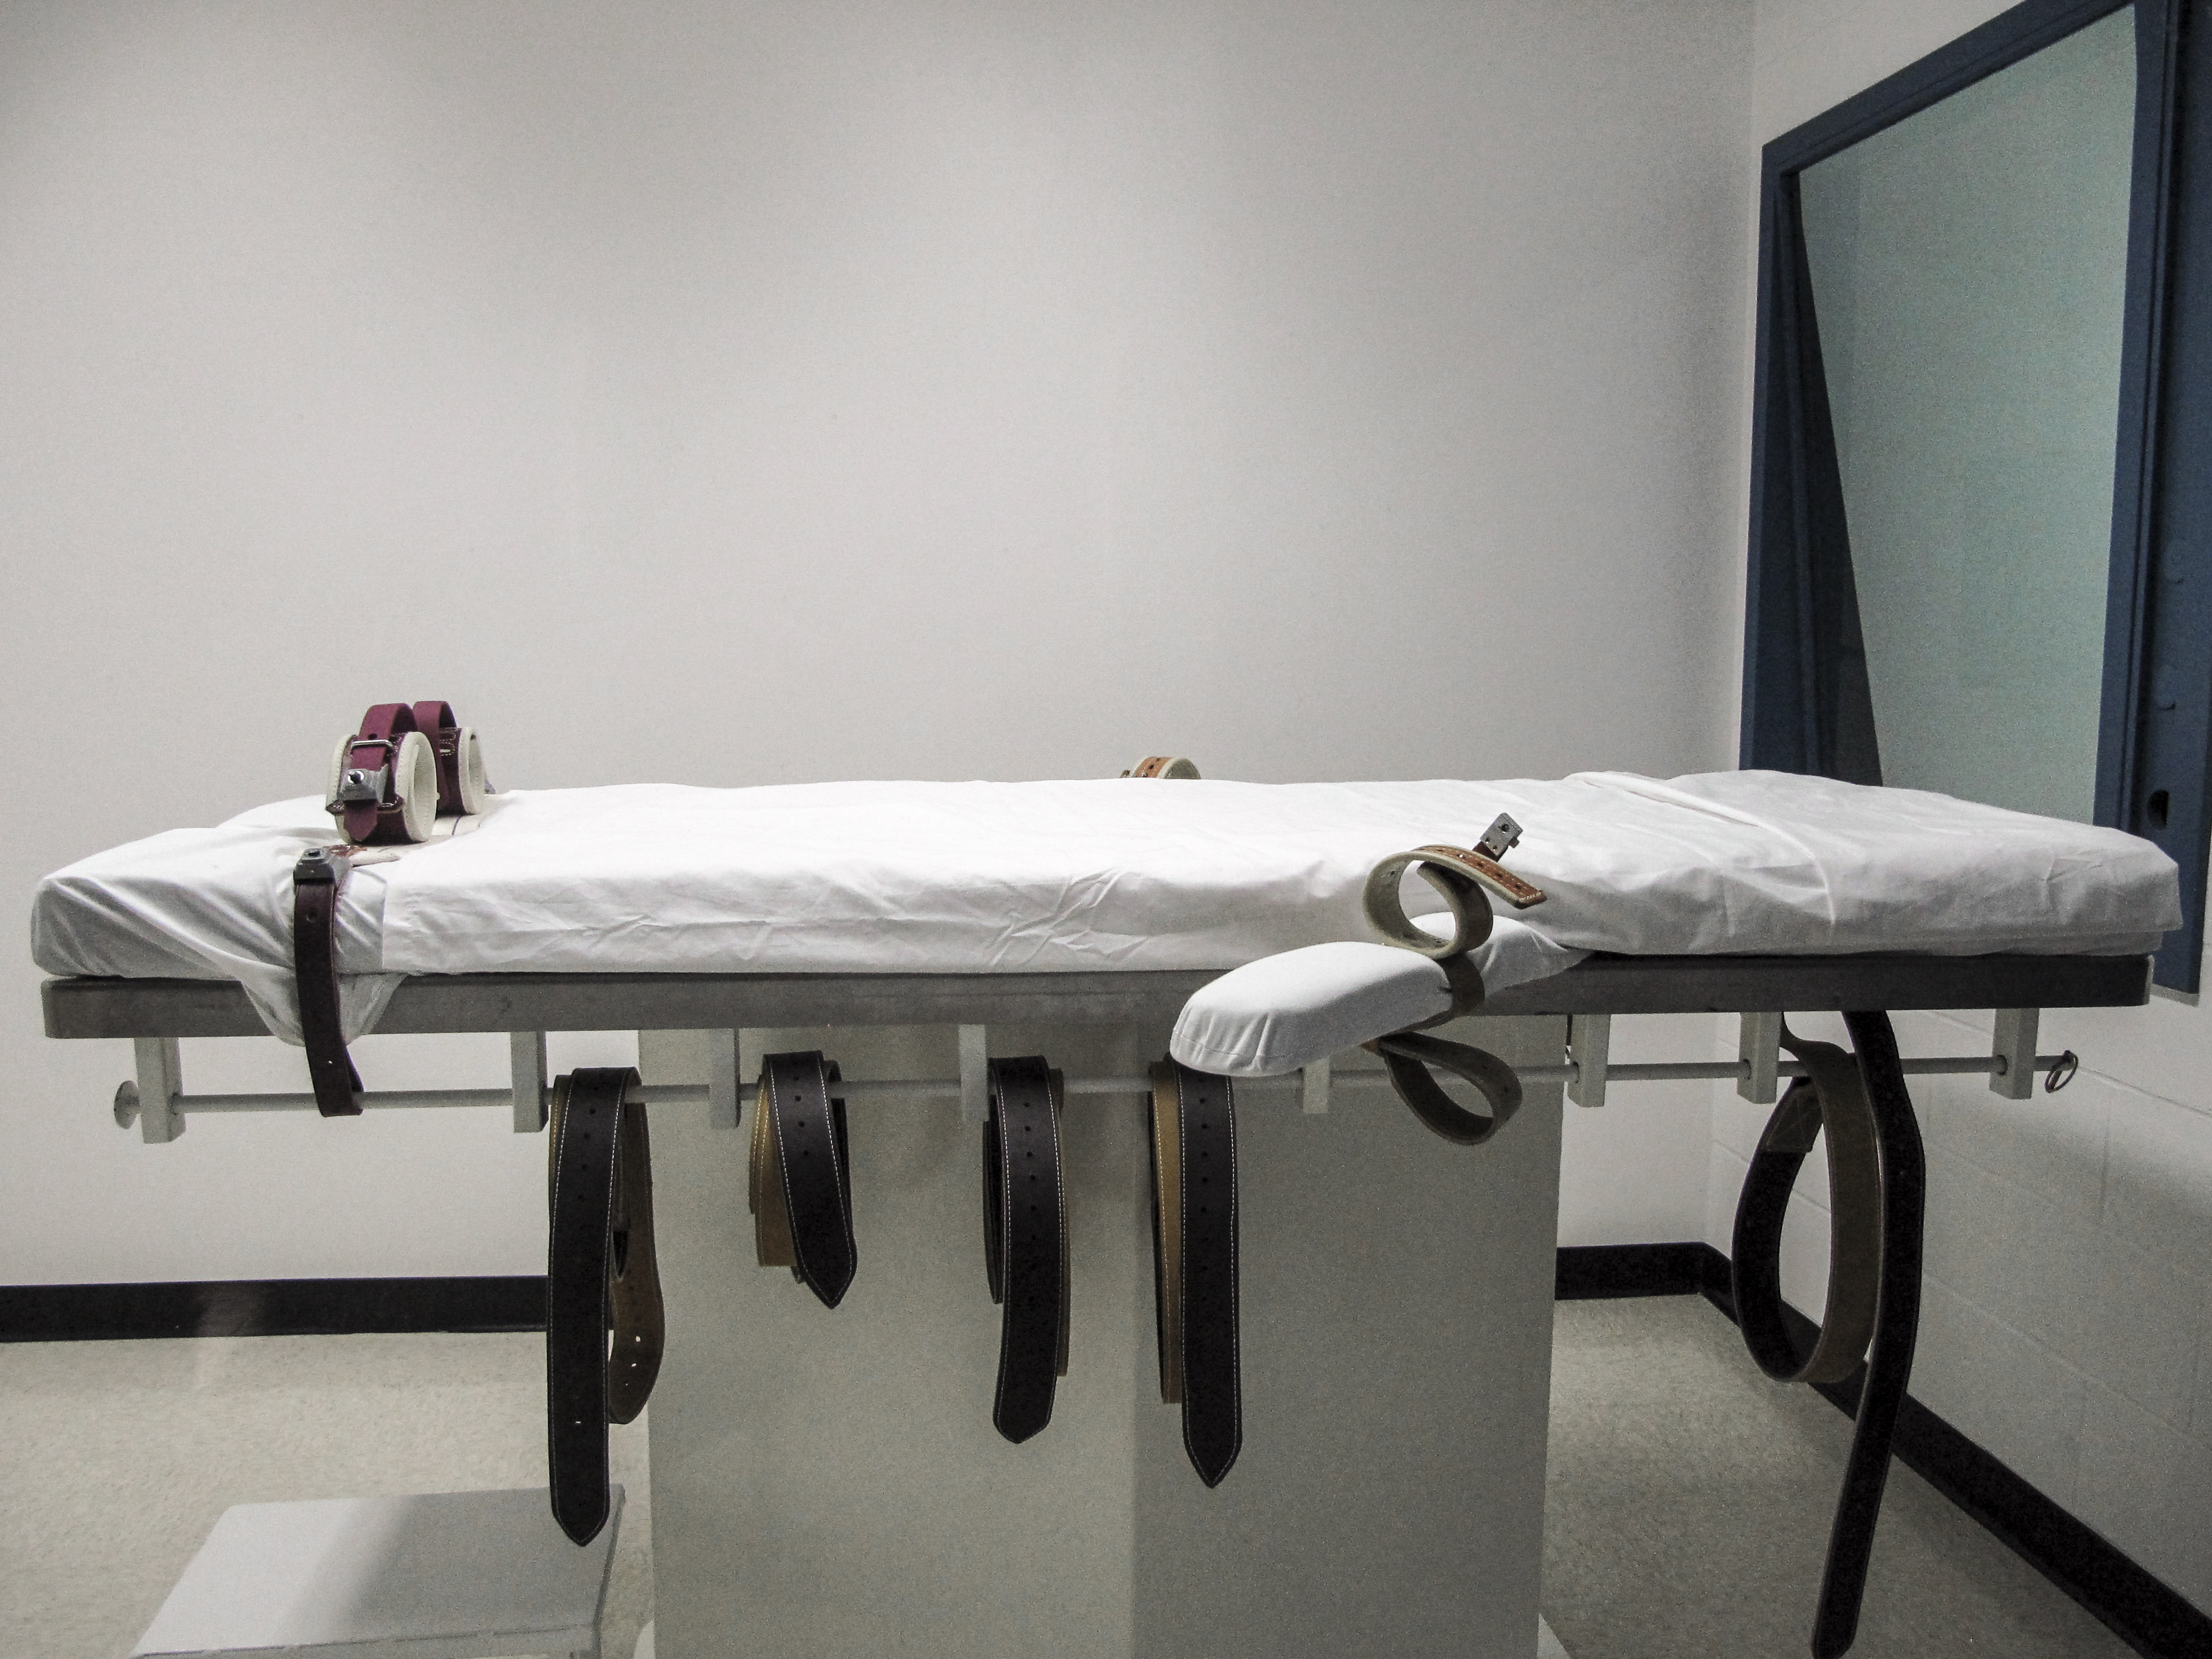 Nebraska's lethal injection chamber at the State Penitentiary in Lincoln, Neb. On May 27, Nebraska became the 19th state to repeal the death penalty. (Nate Jenkins—AP)